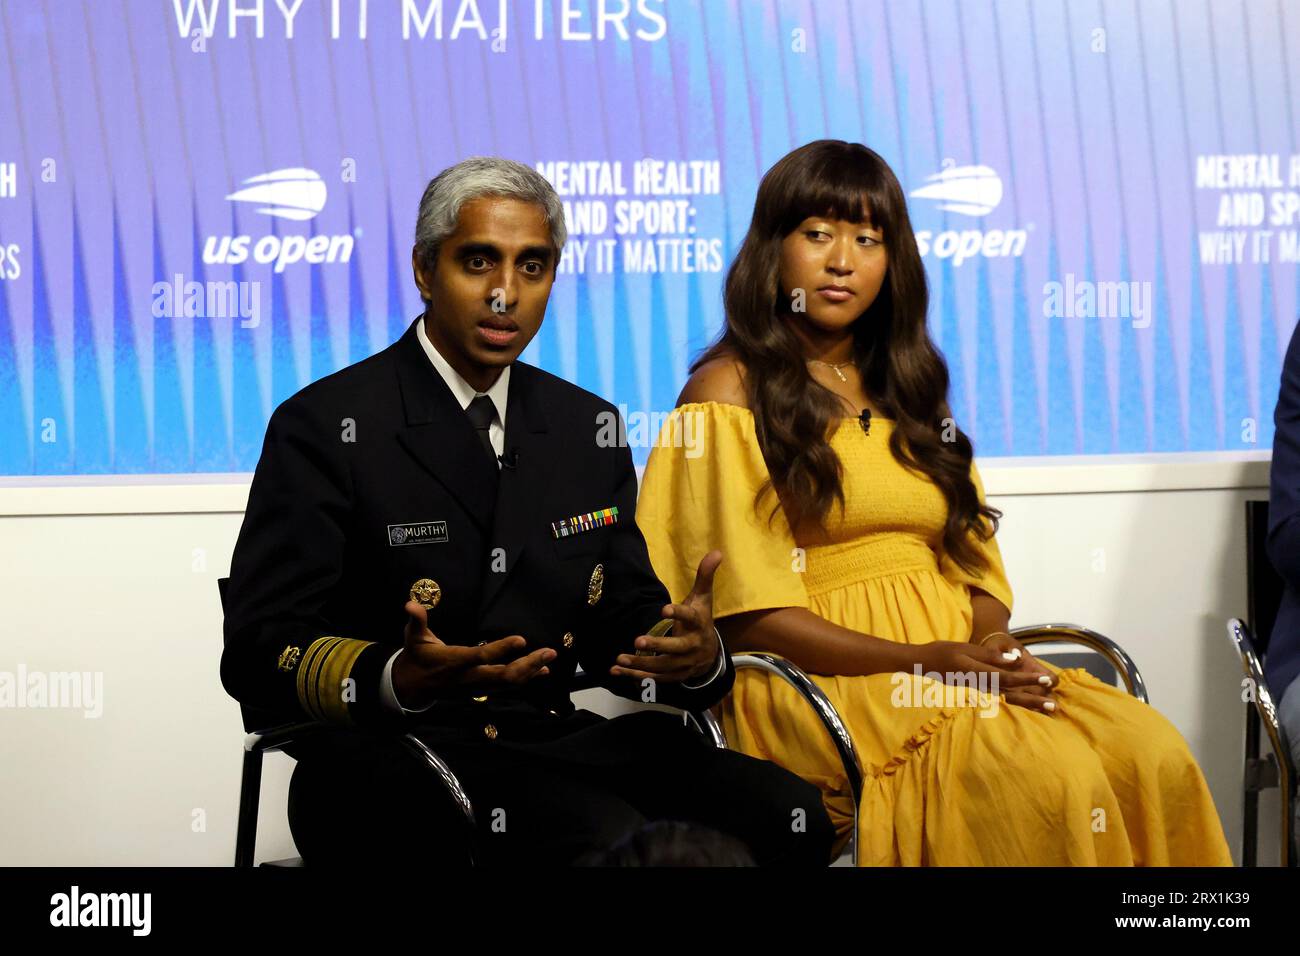 Mental Health and Sport Press conference at US Open on 6 September 2023.  From Left to Right:  US Surgeon General  Dr. Vivek H. Murthy, Naomi Osaka, Michael Phelps, Dr. Brian Hainline Stock Photo